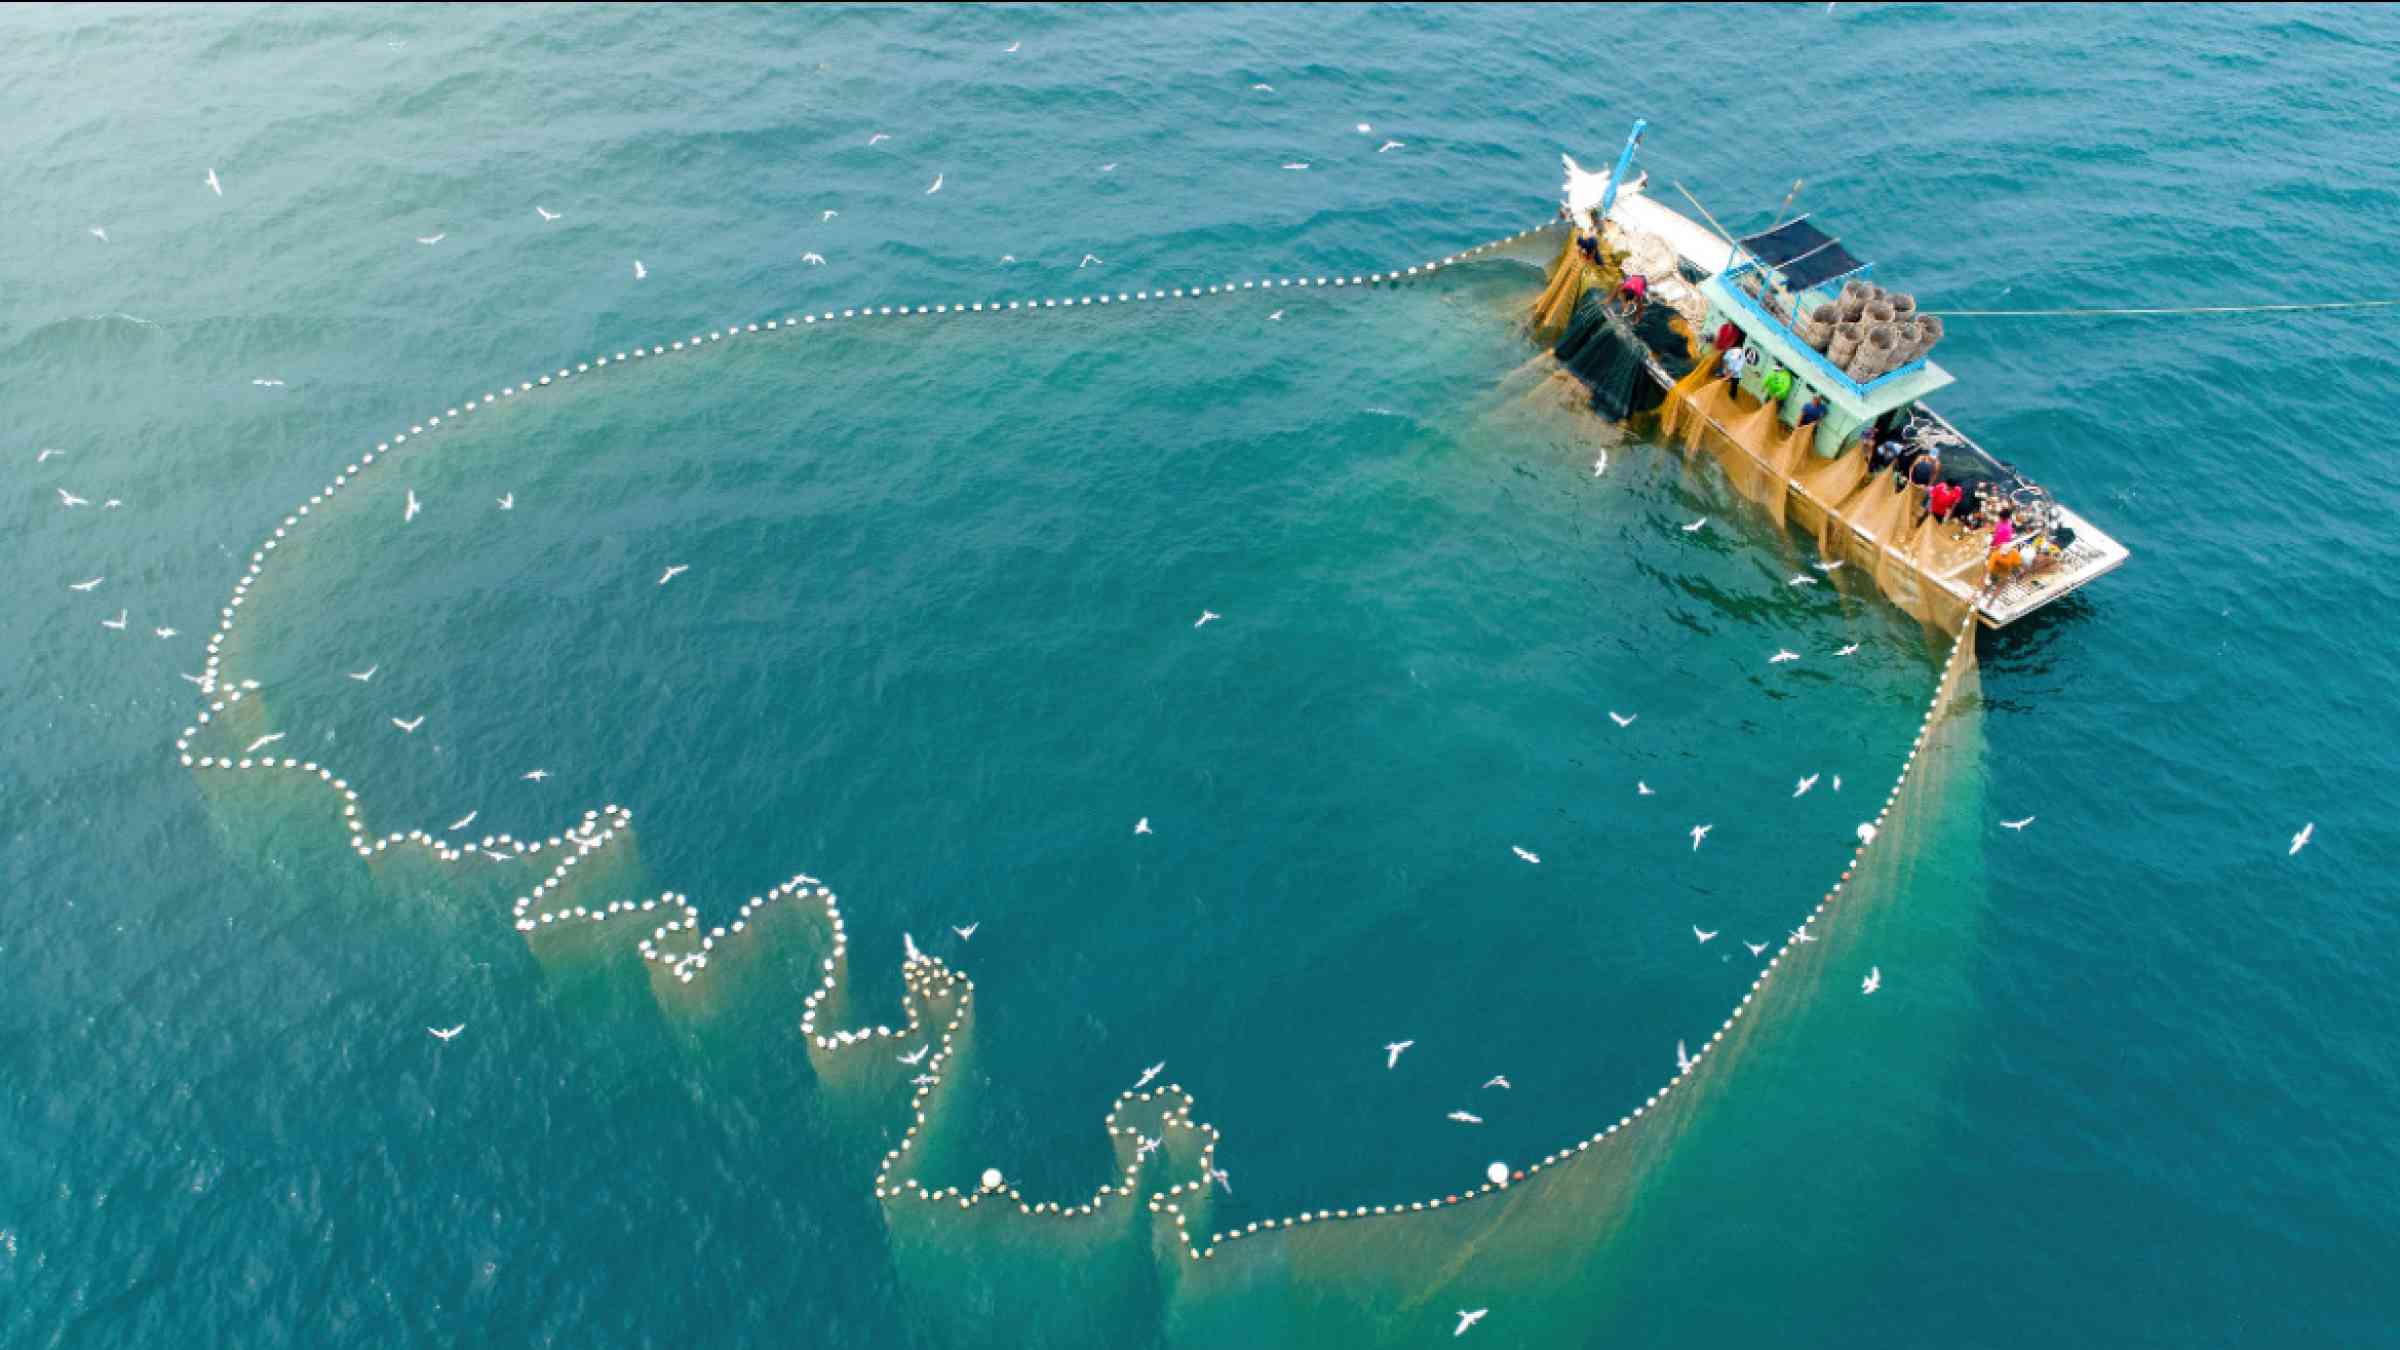 Aerial view of a fishing vessel catching fish using a net in the ocean.